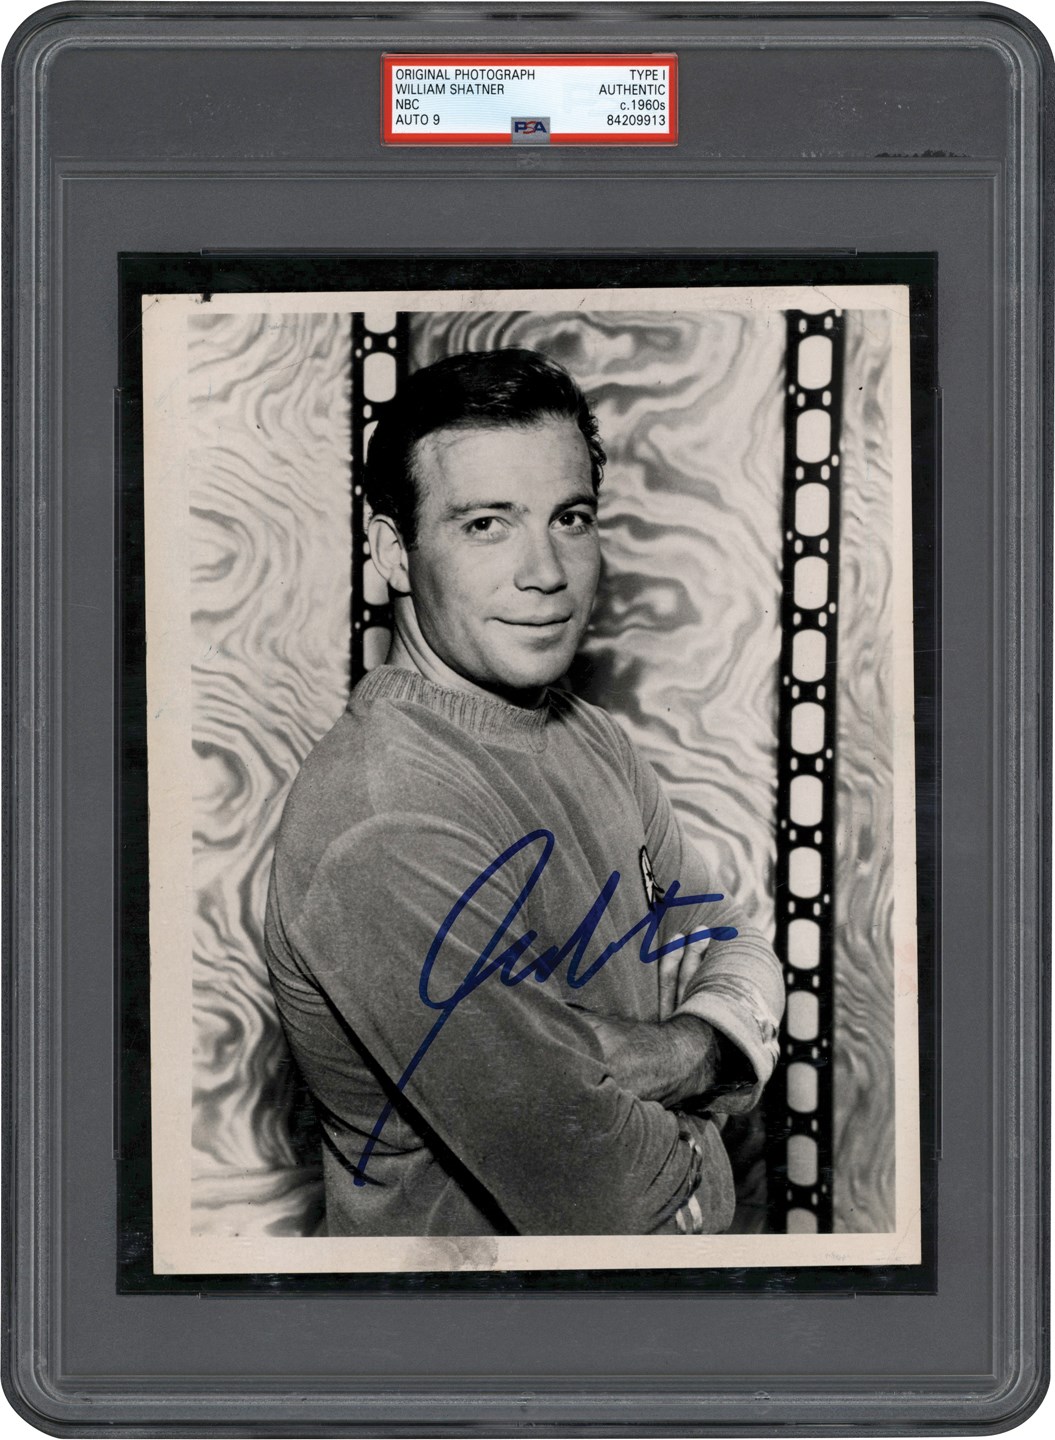 - The Very First Image of William Shatner as Captain Kirk Signed Original Photograph (PSA Type I)